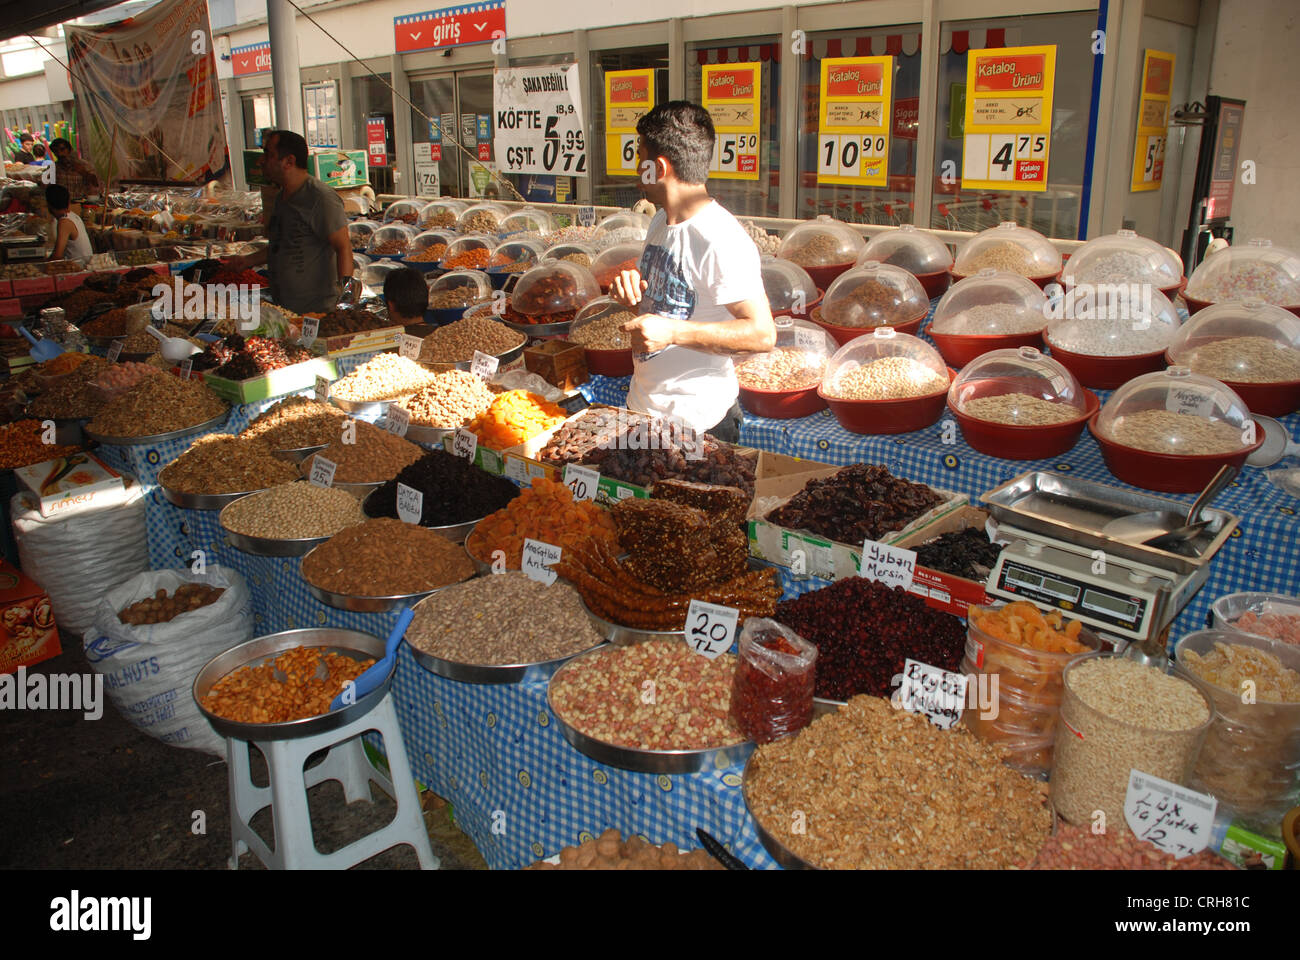 Scenes from Bodrum market in South West Turkey. Picture: Adam Alexander/Alamy Stock Photo